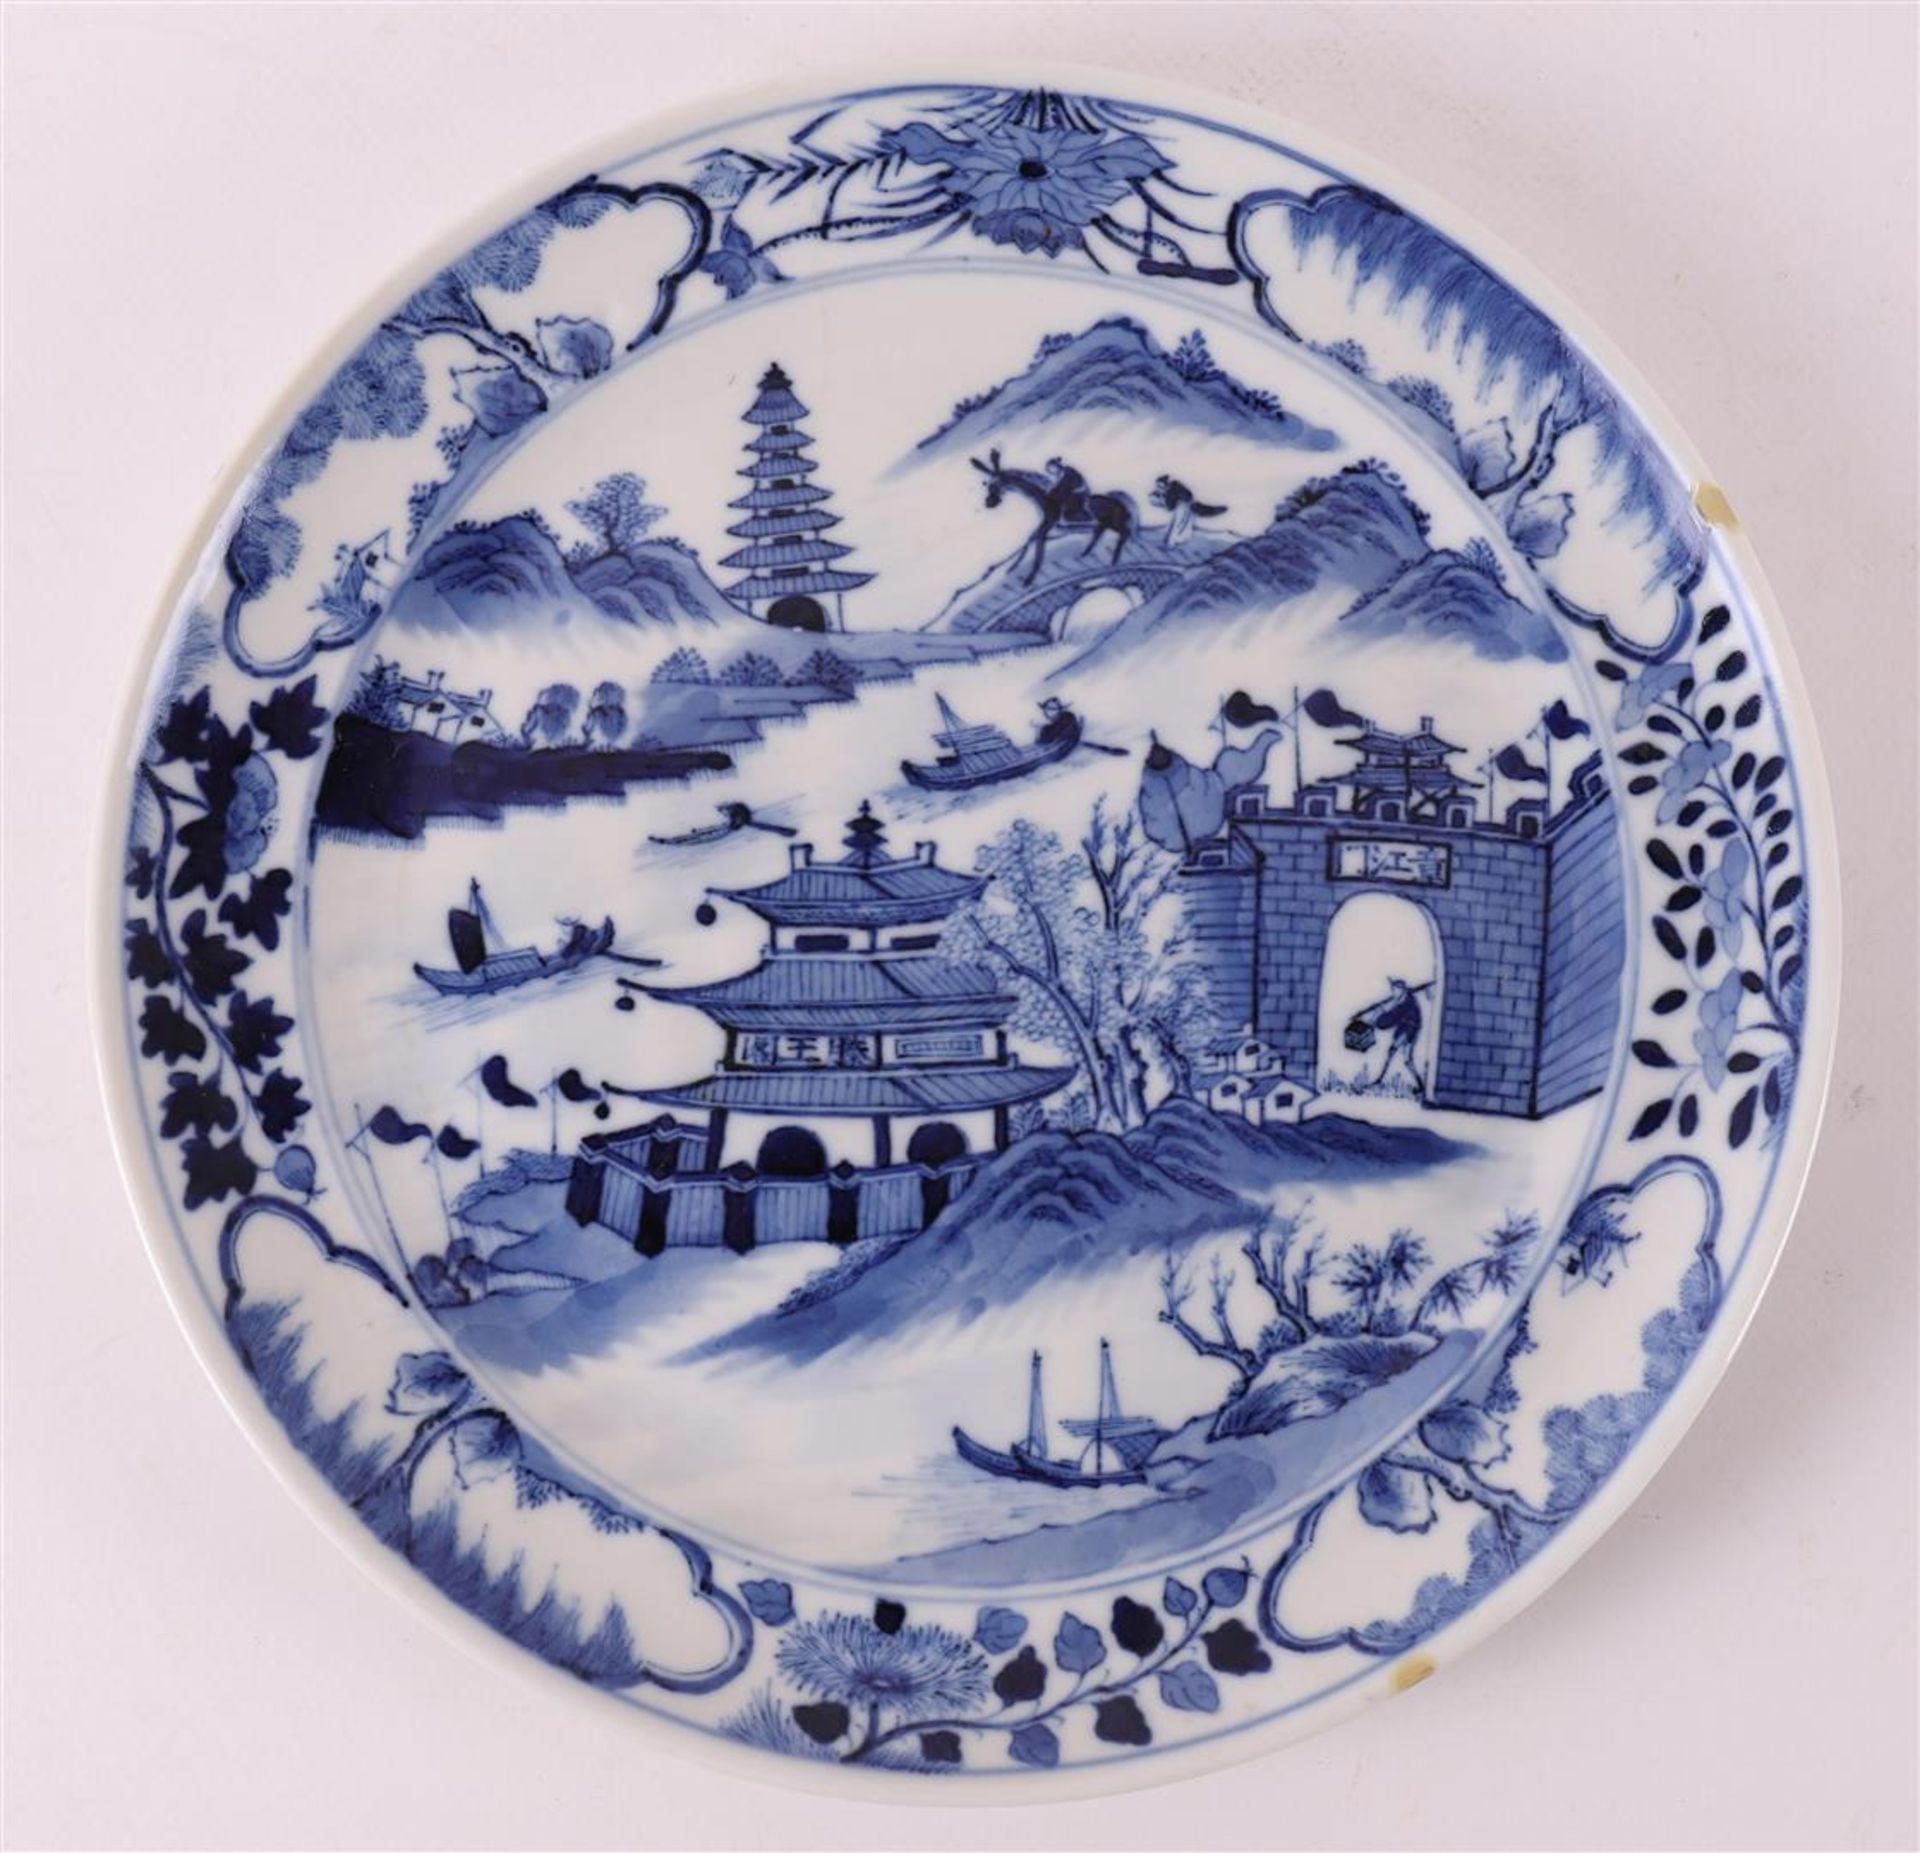 A blue and white porcelain plate, China, 19th century.